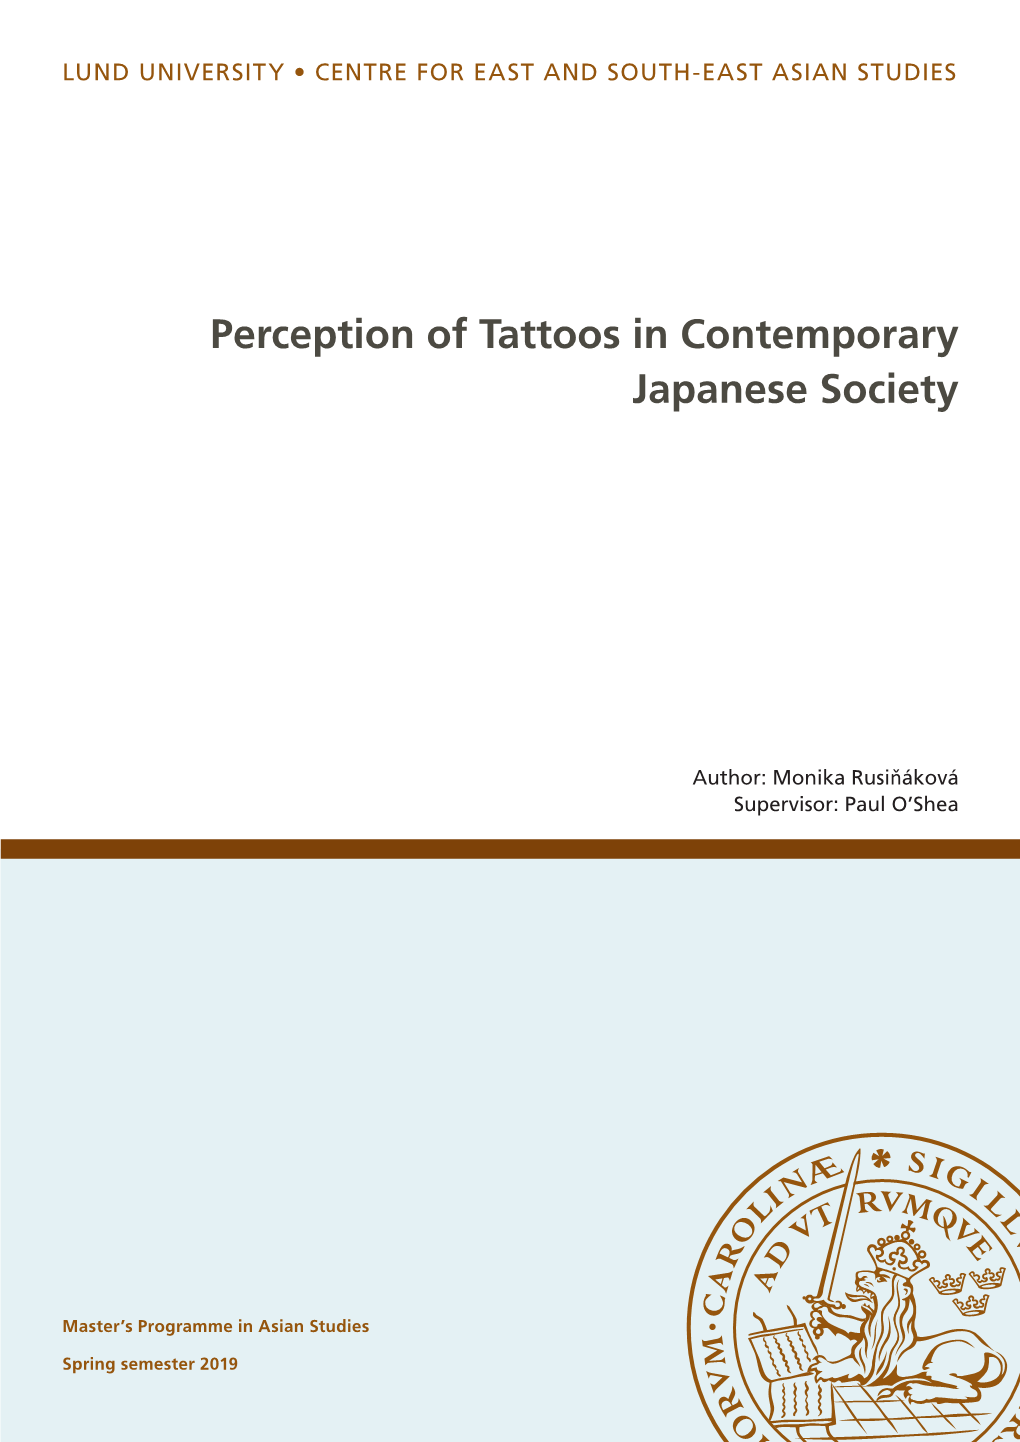 Perception of Tattoos in Contemporary Japanese Society